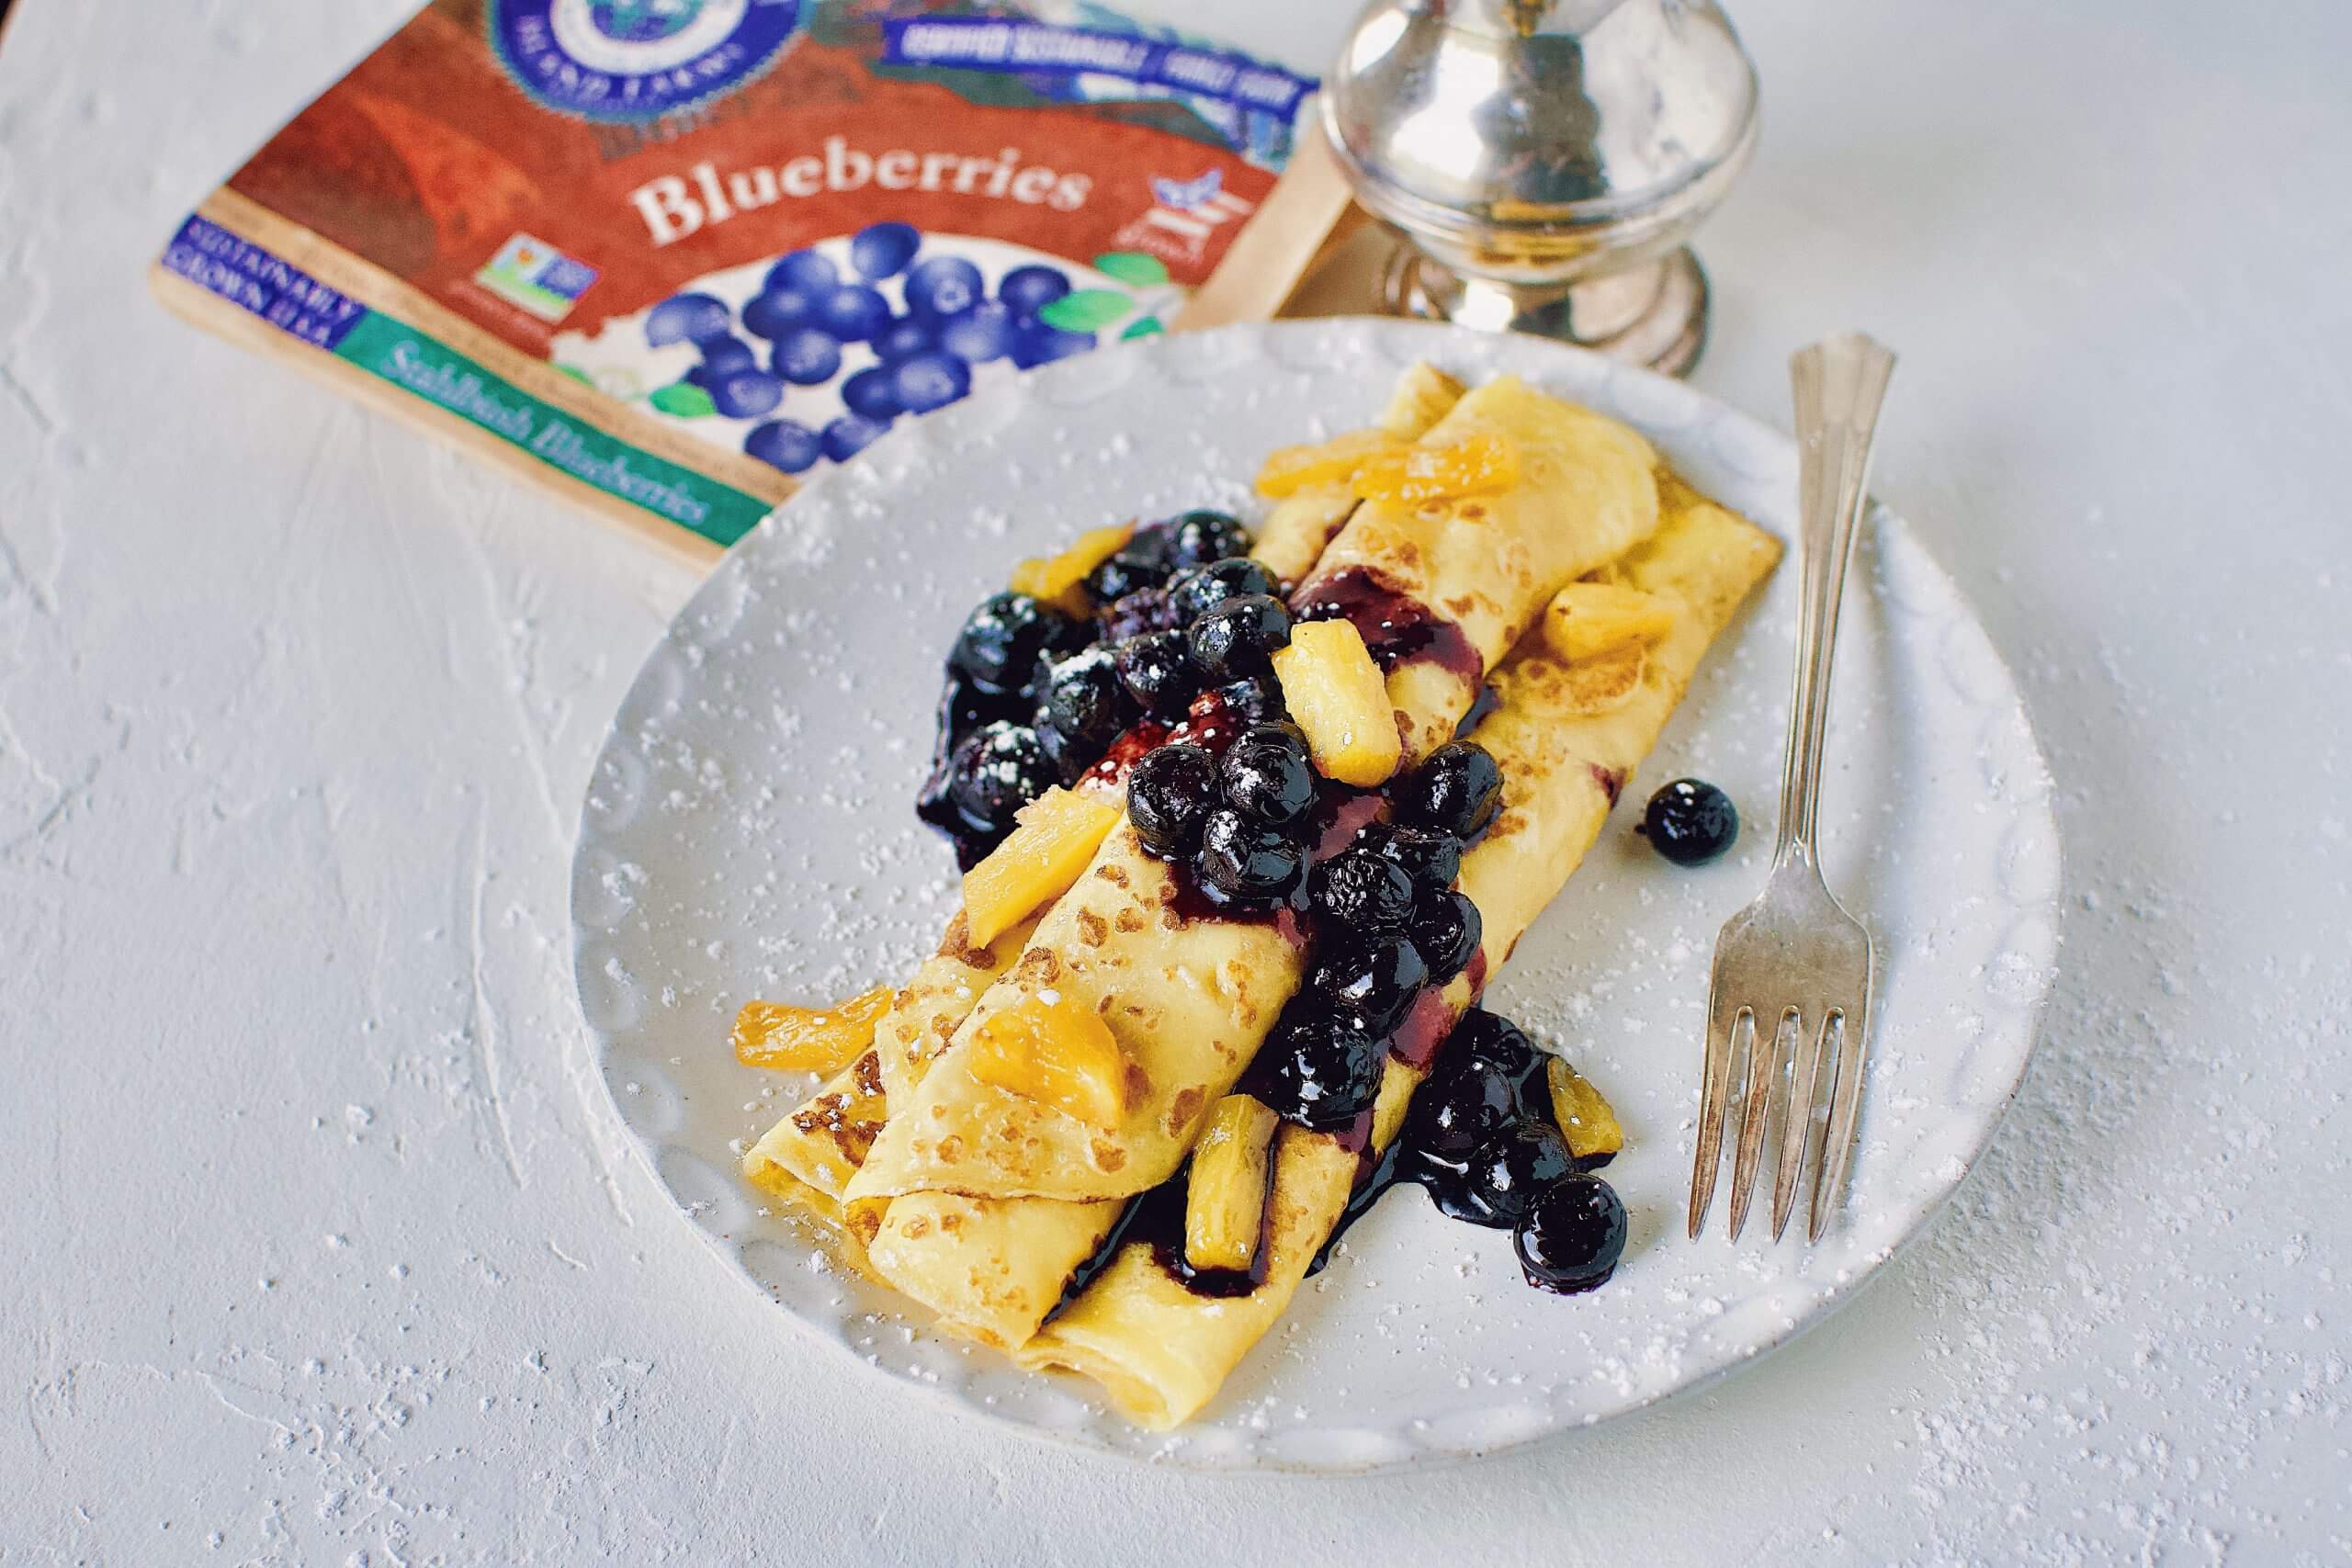 Crepes with Caramelized Pineapple and Blueberries Stahlbush Island Farms Frozen Blueberries